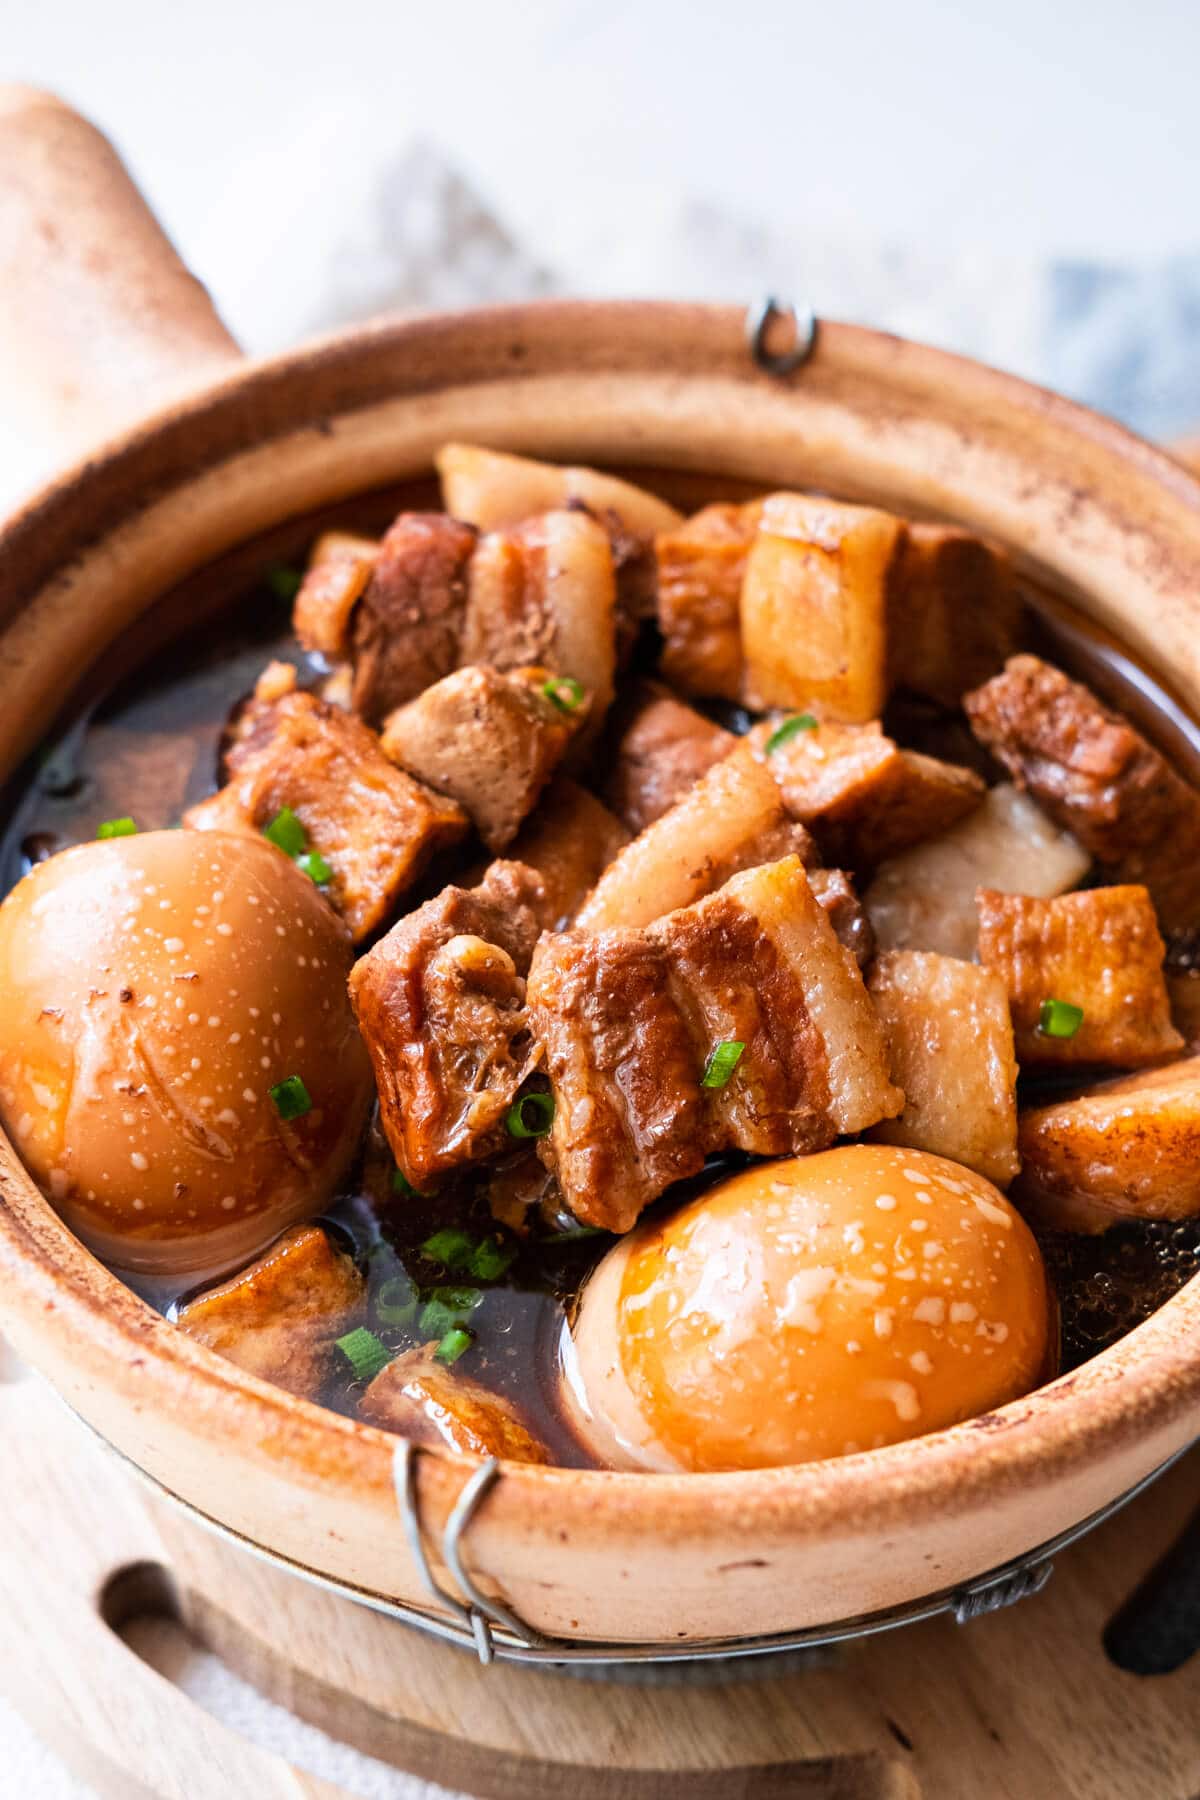 Braised pork belly recipe with pork, eggs in soy sauce. 